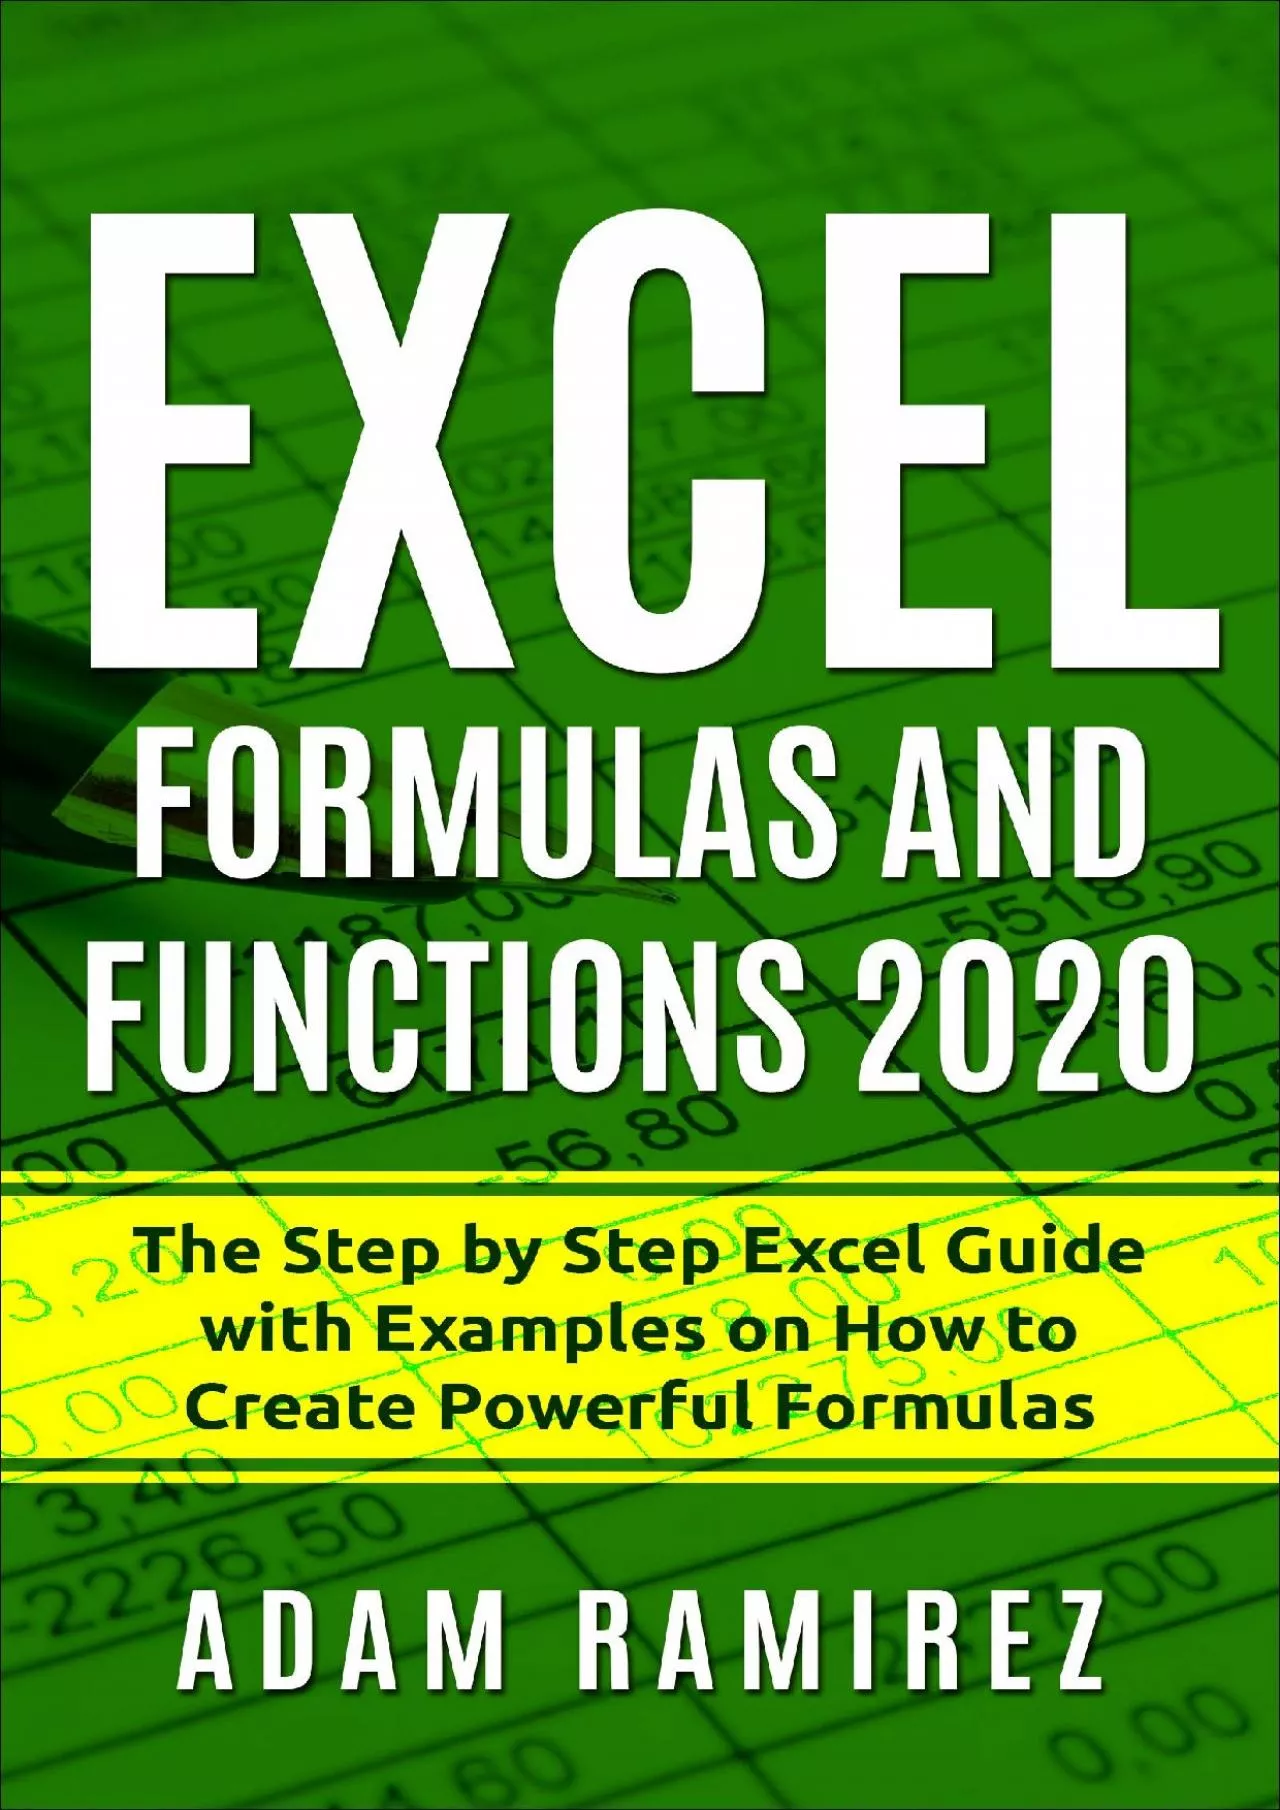 Excel Formulas and Functions 2020: The Step by Step Excel Guide with Examples on How to